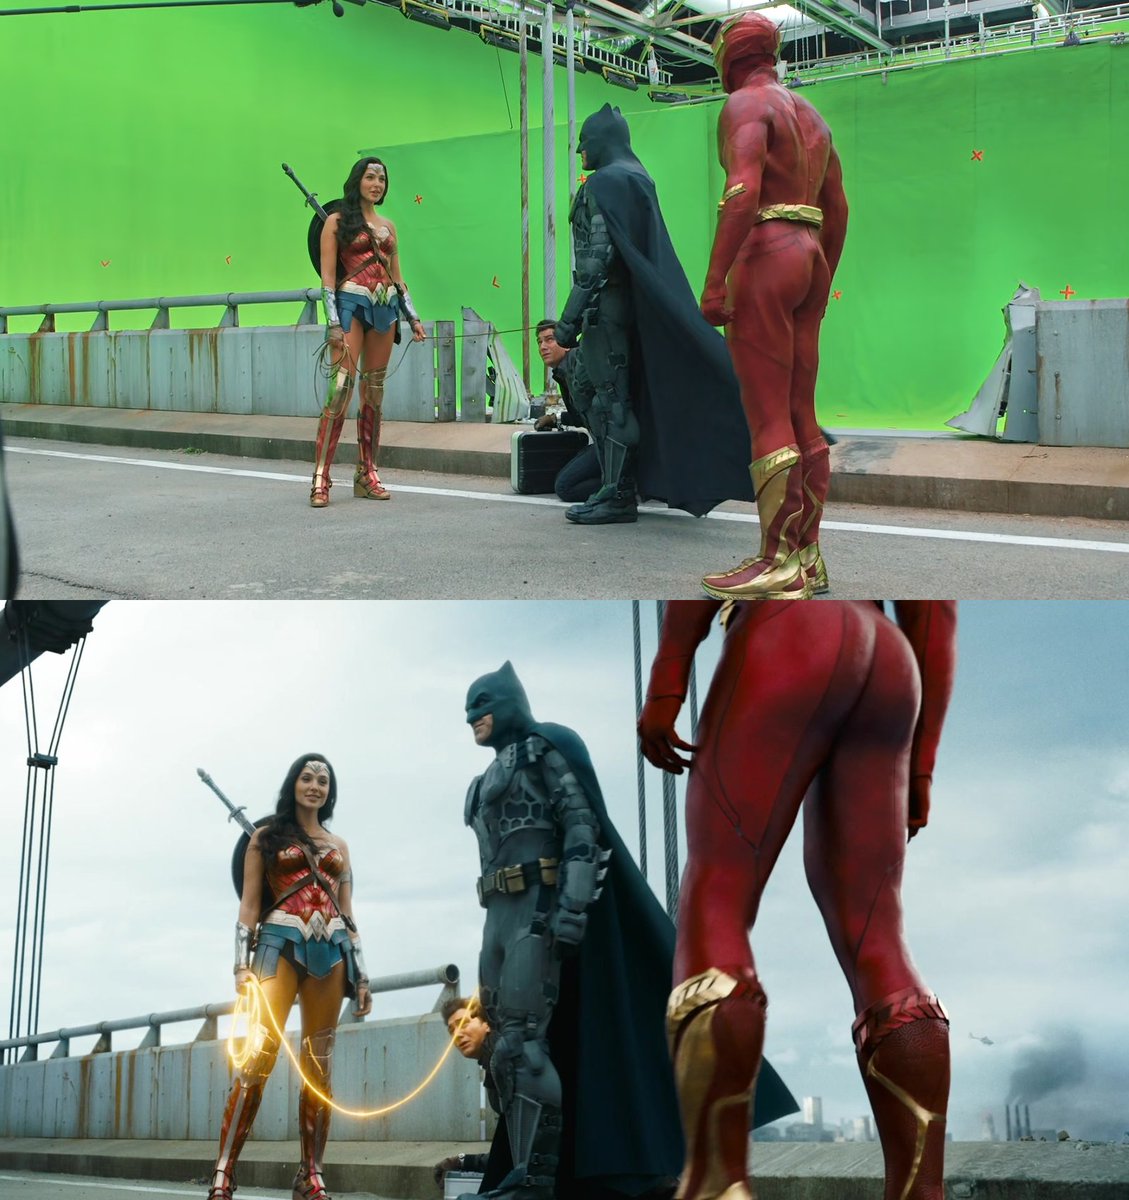 They actually did CGI Ezra Miller's ass in The Flash